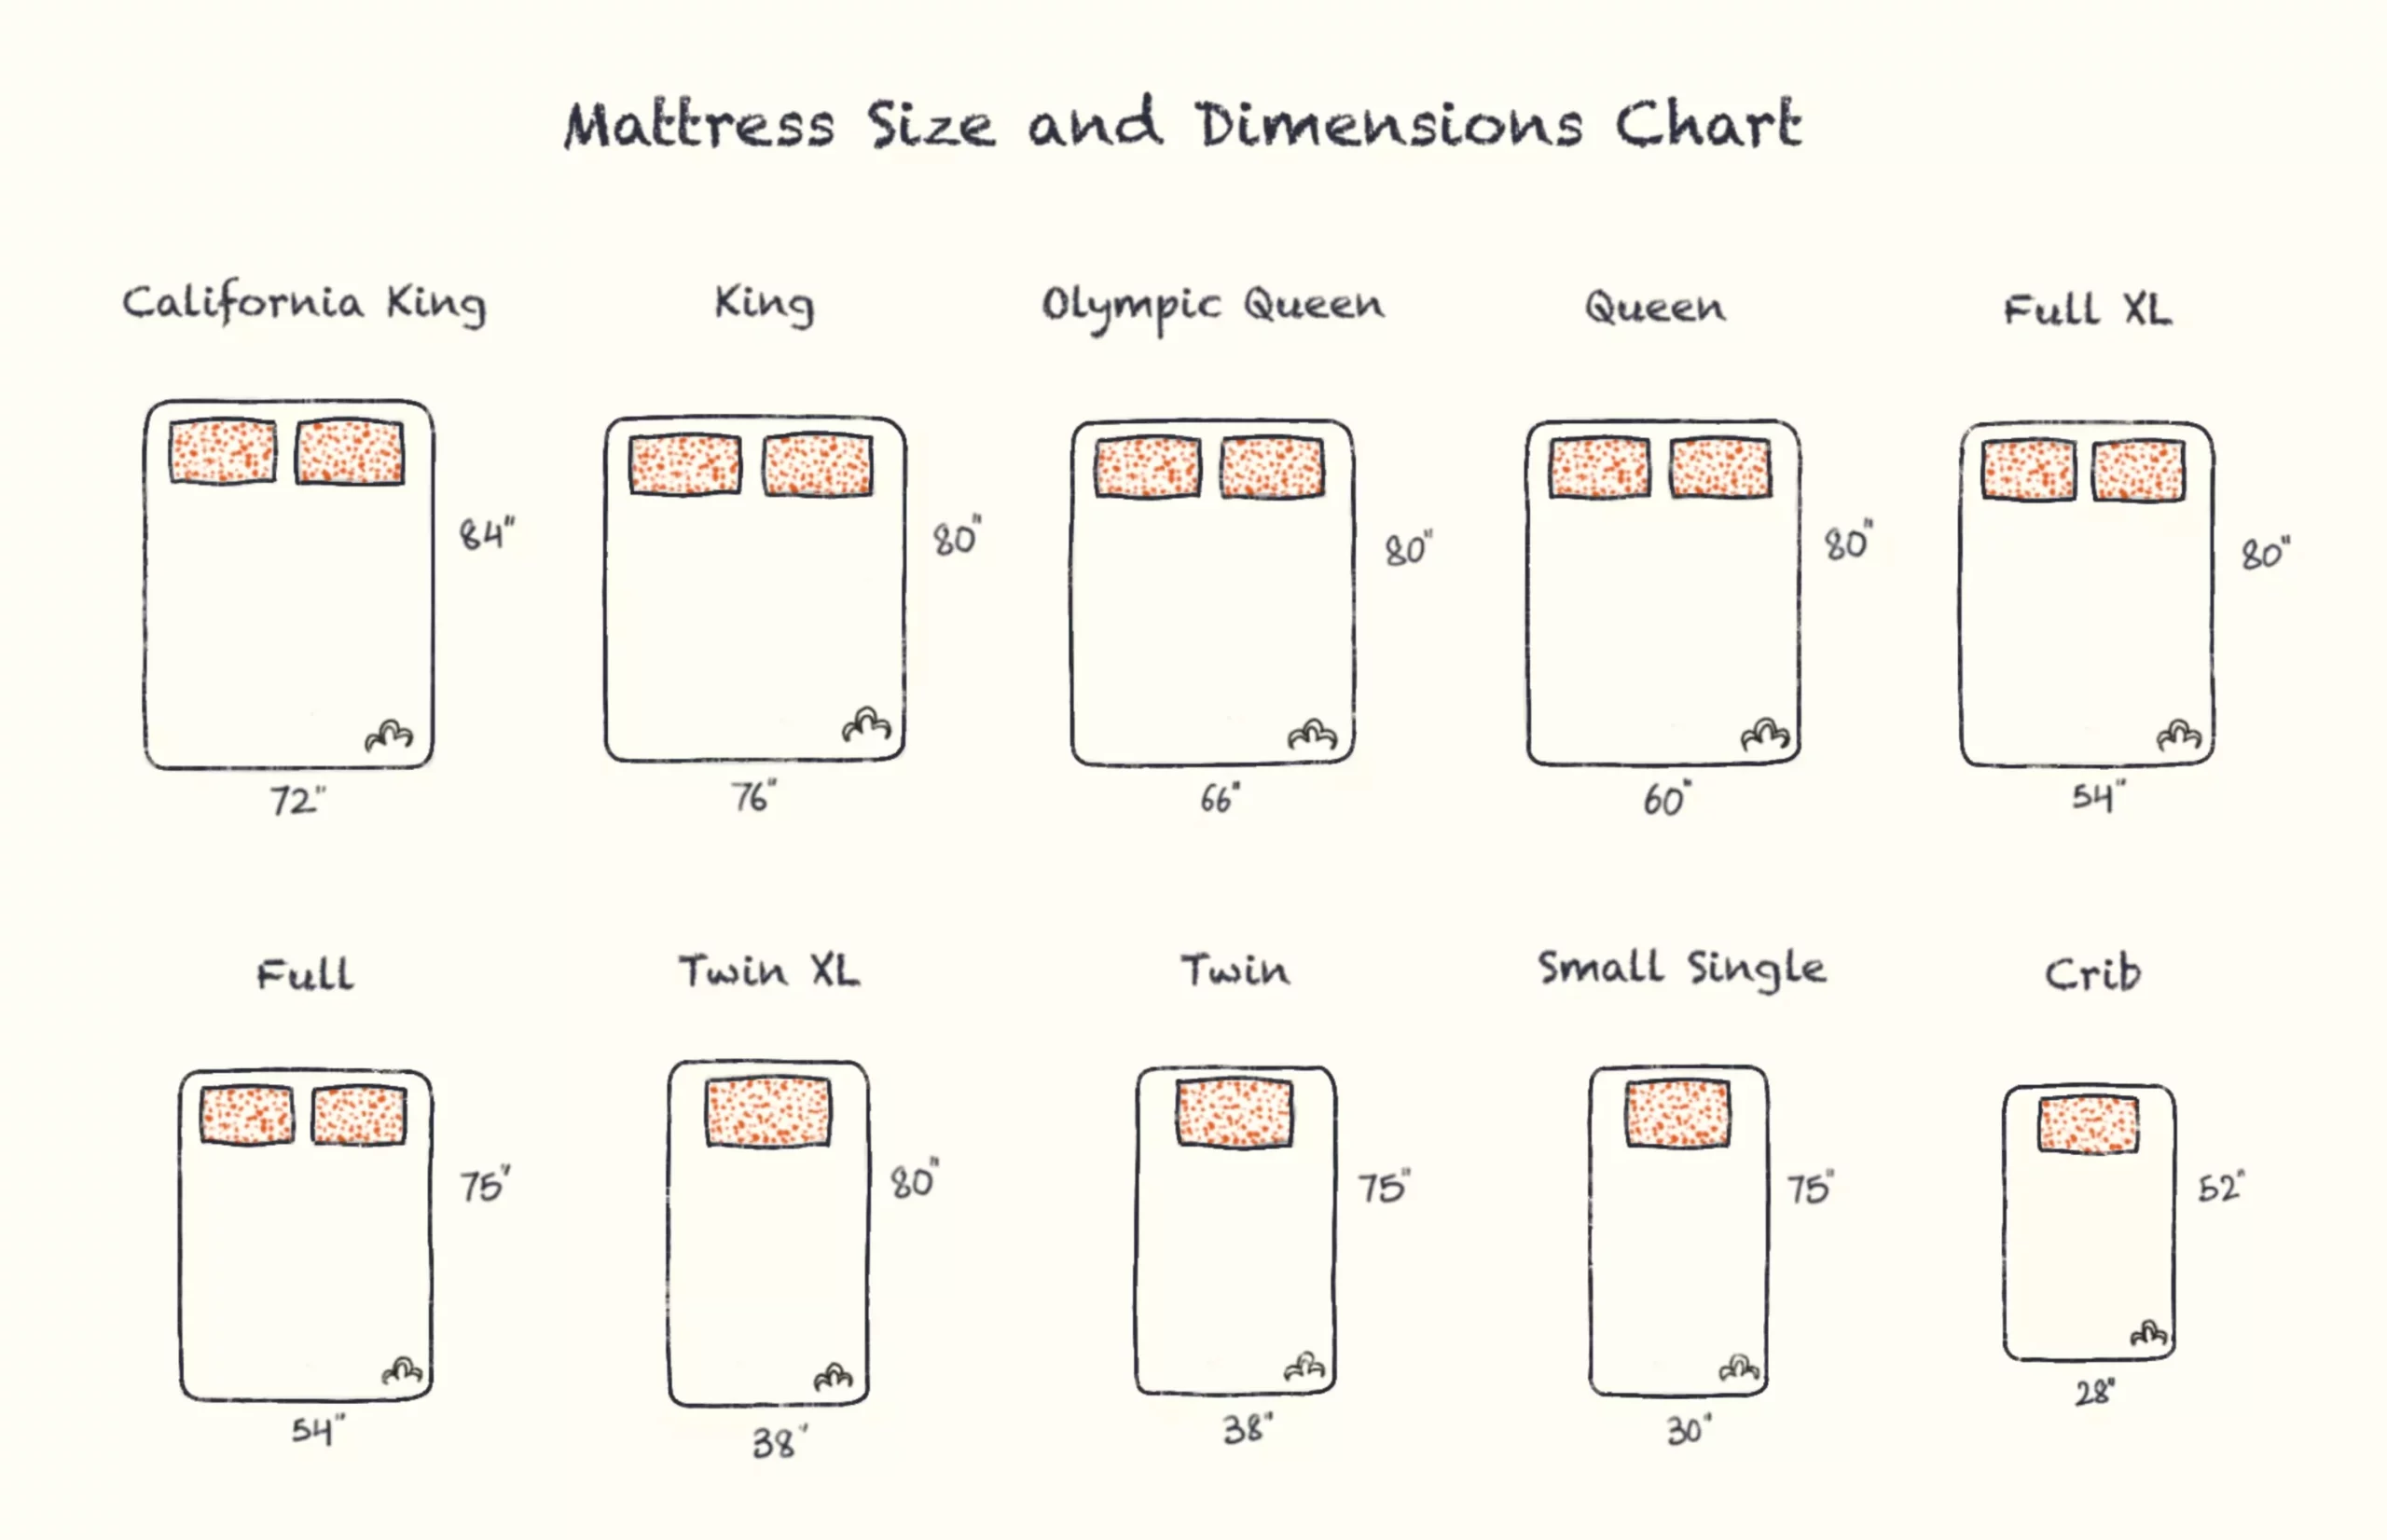 Headboard Sizes Chart And Dimensions Guide | DreamCloud